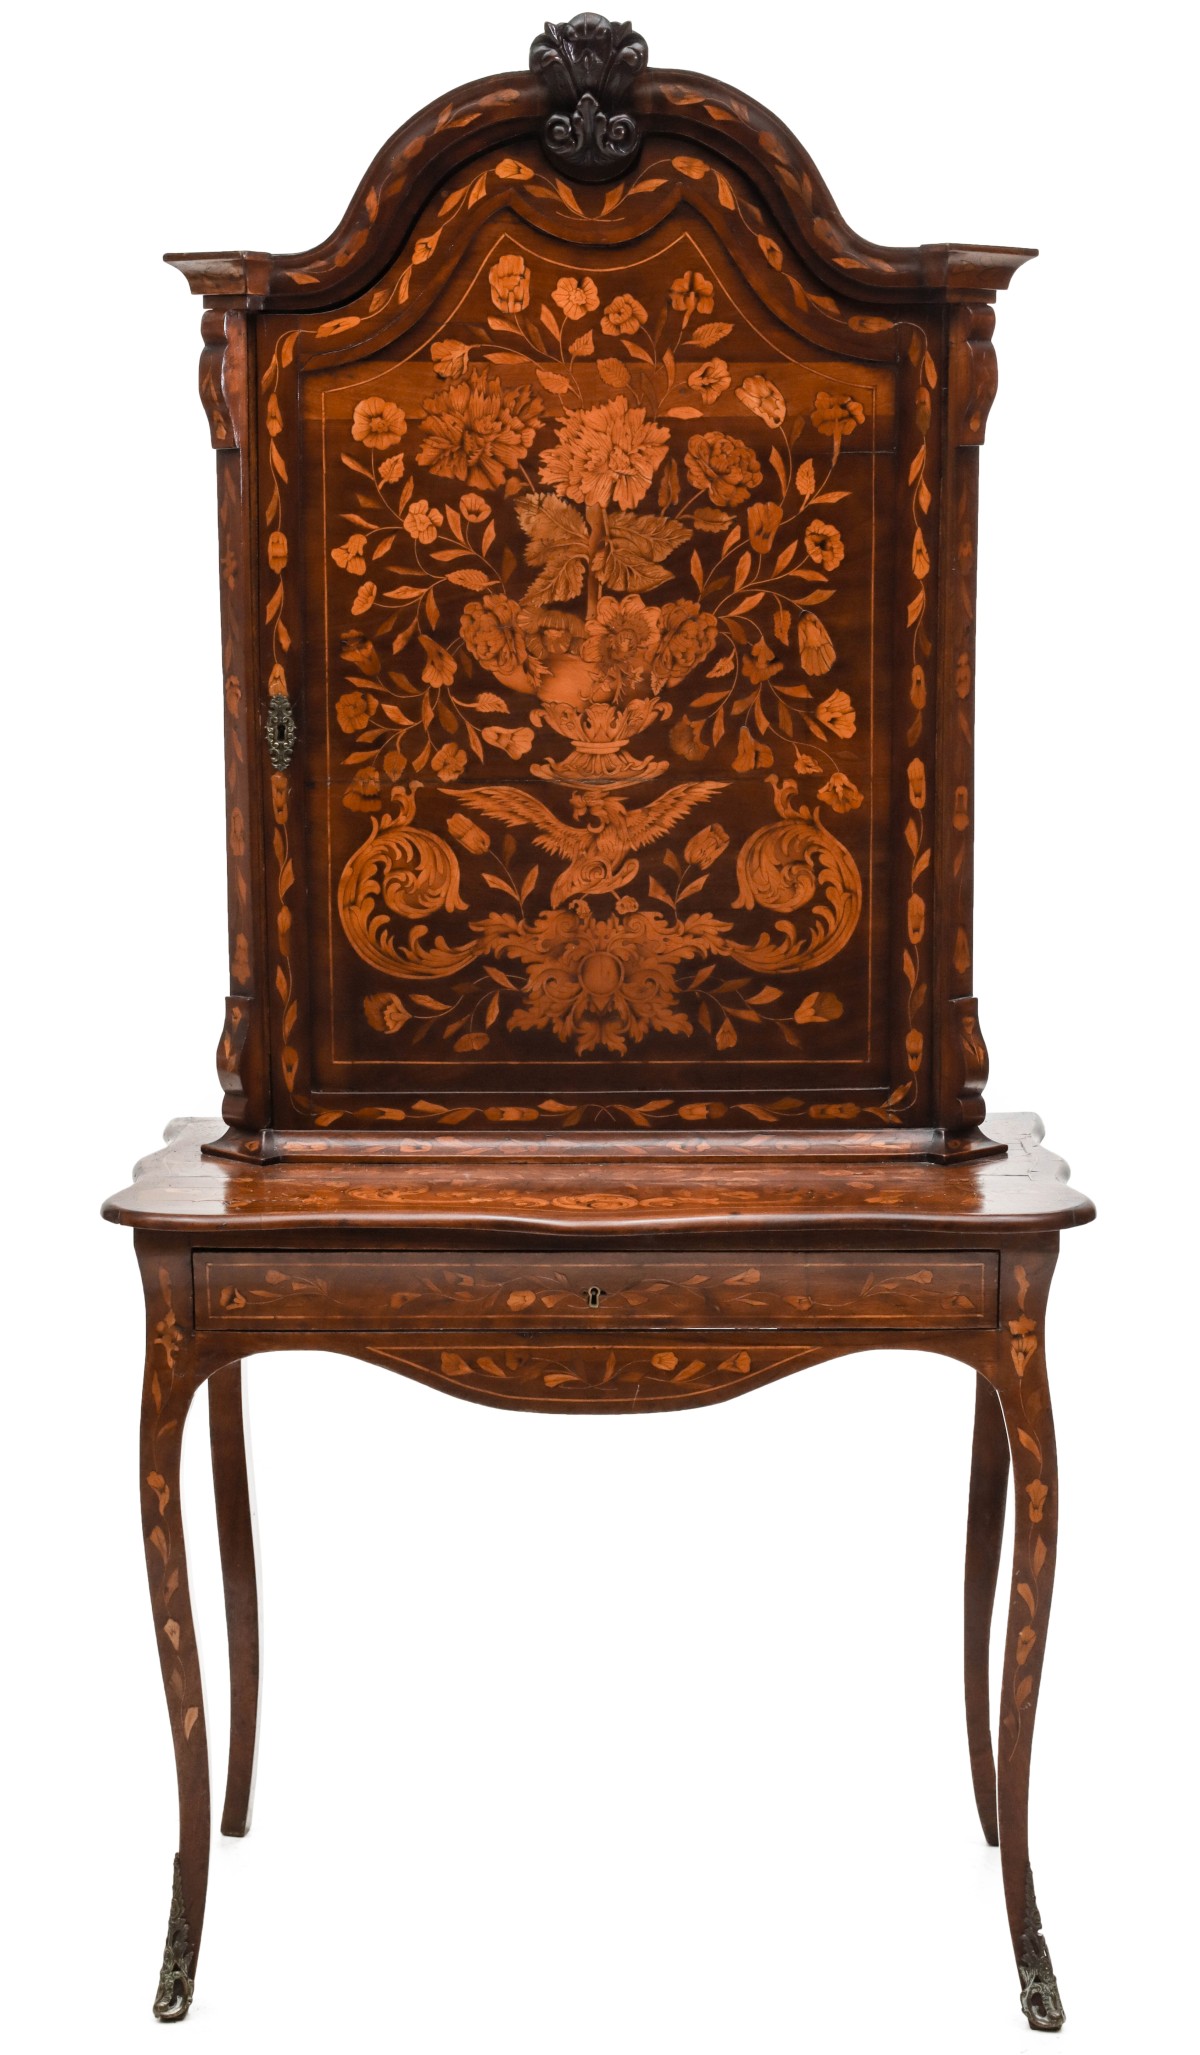 A 19TH CENTURY DUTCH MARQUETRY CABINET ON STAND